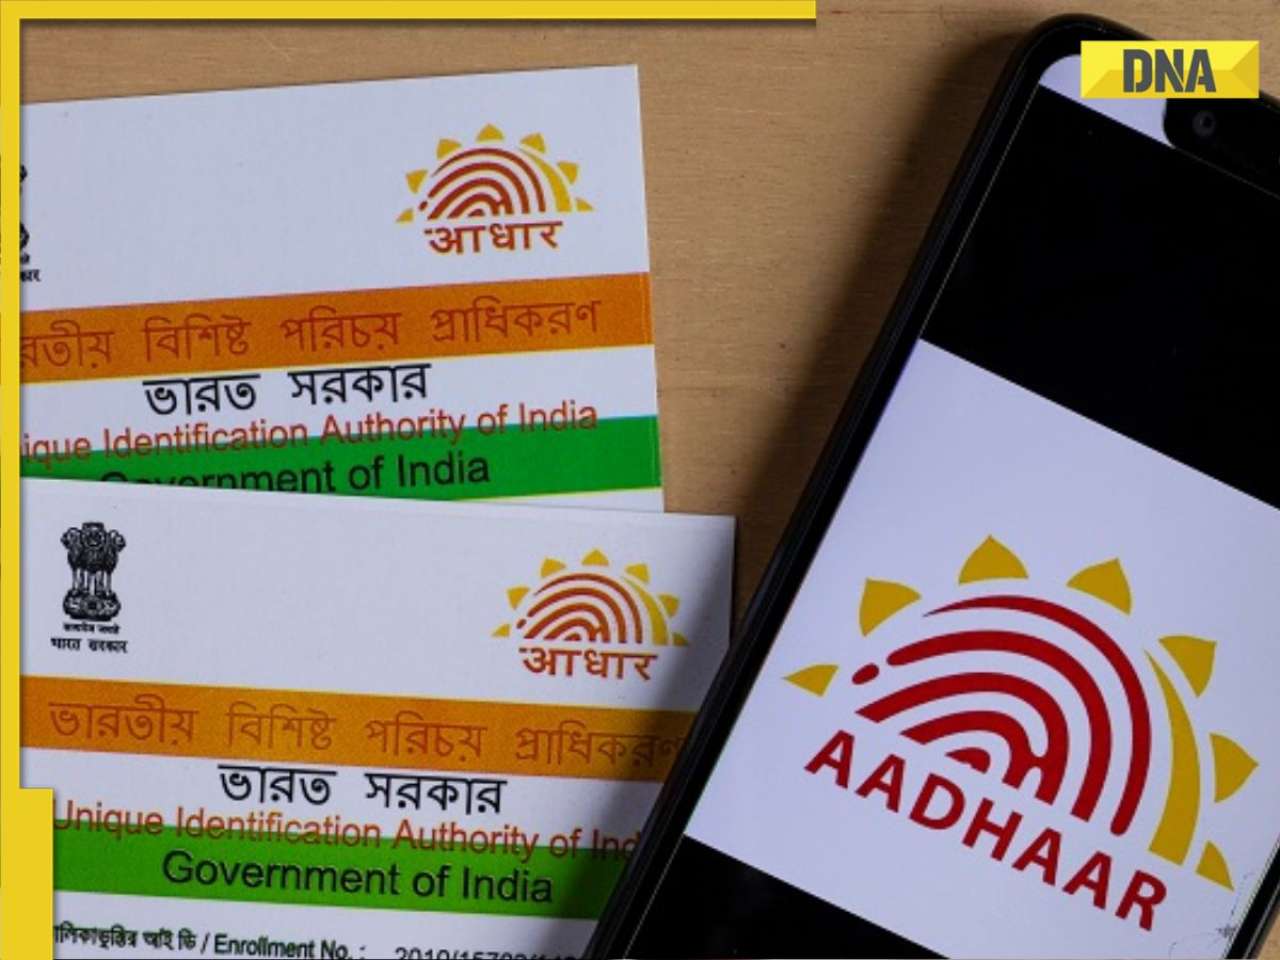 Deadline to update Aadhaar card details for free extended; check last date, how to update